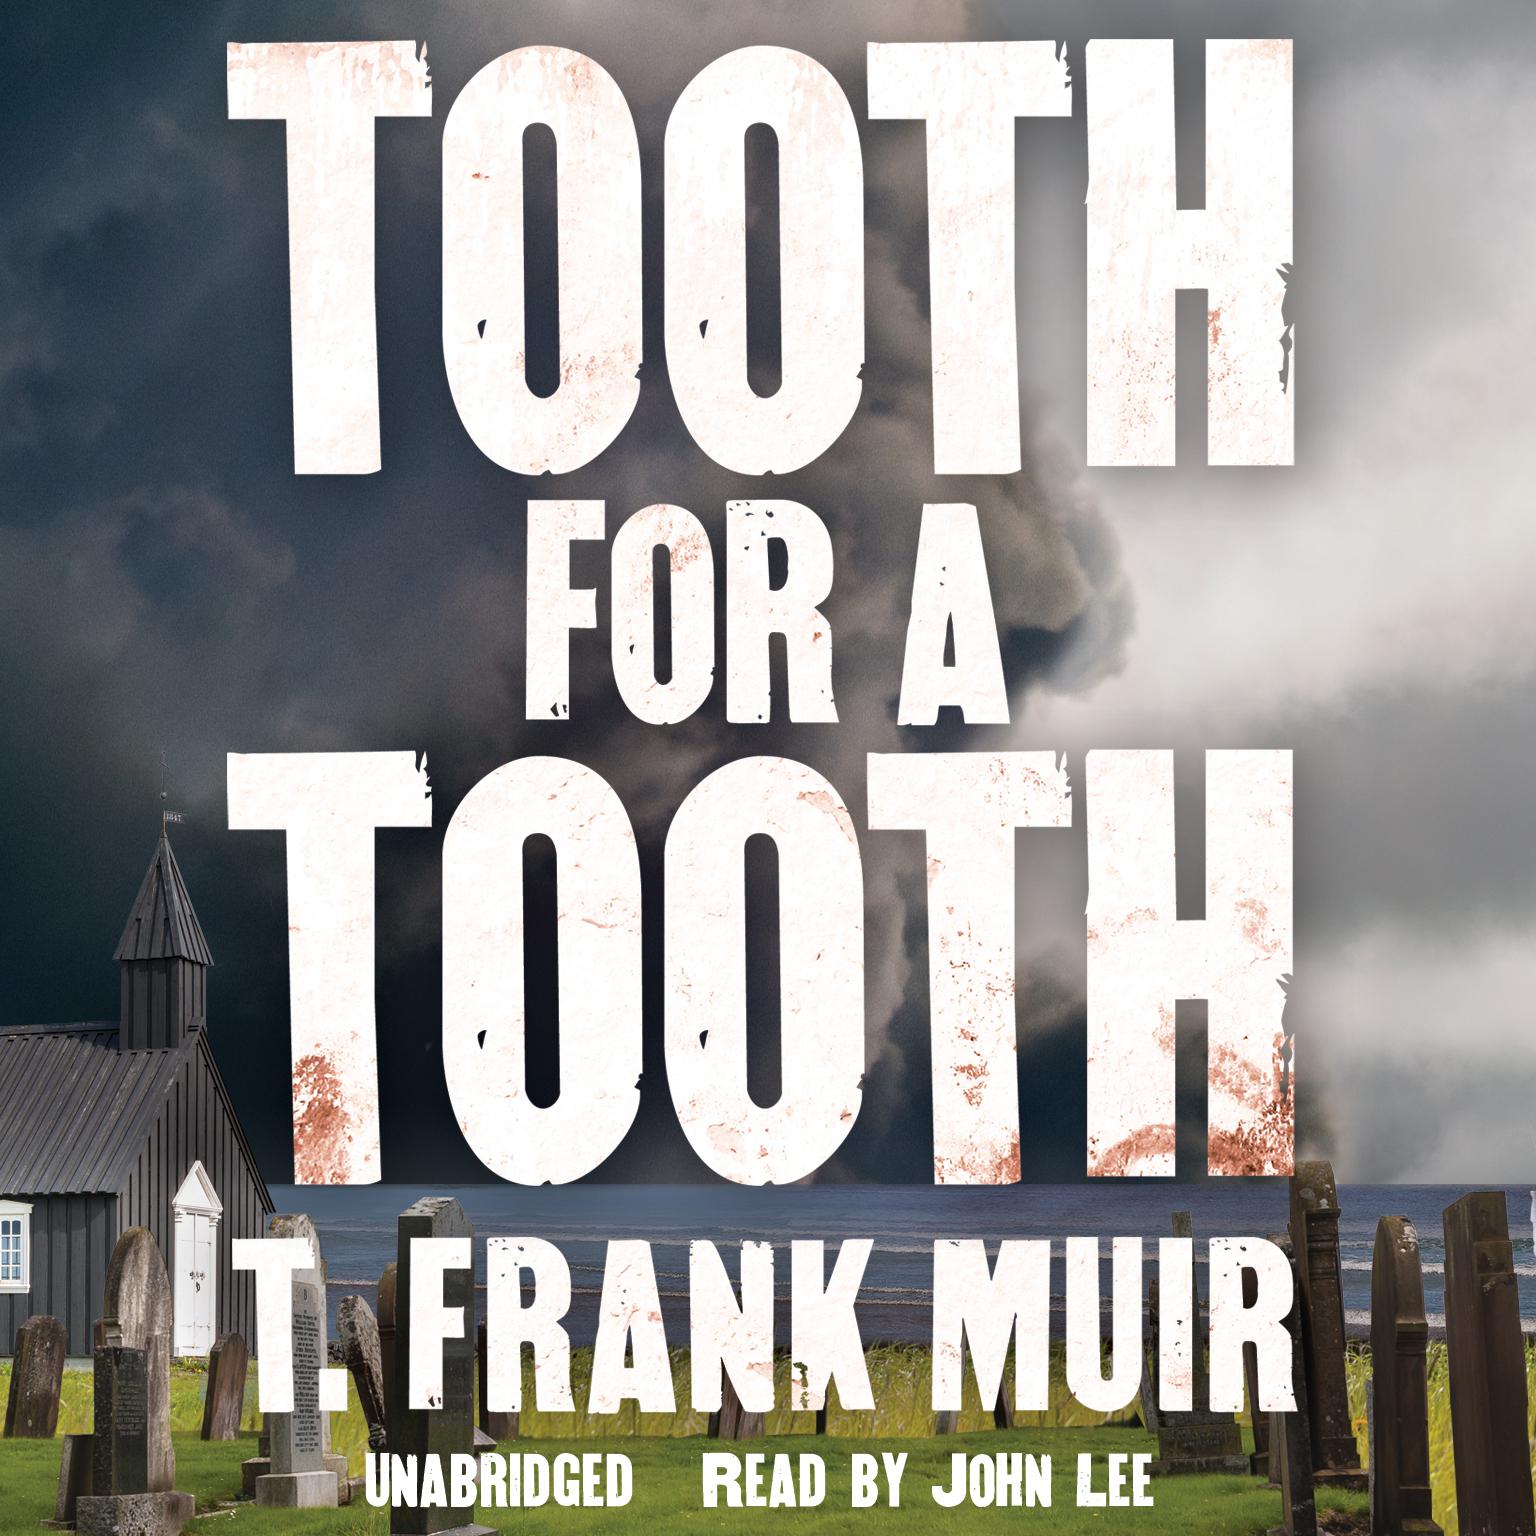 Tooth for a Tooth Audiobook, by T. Frank Muir